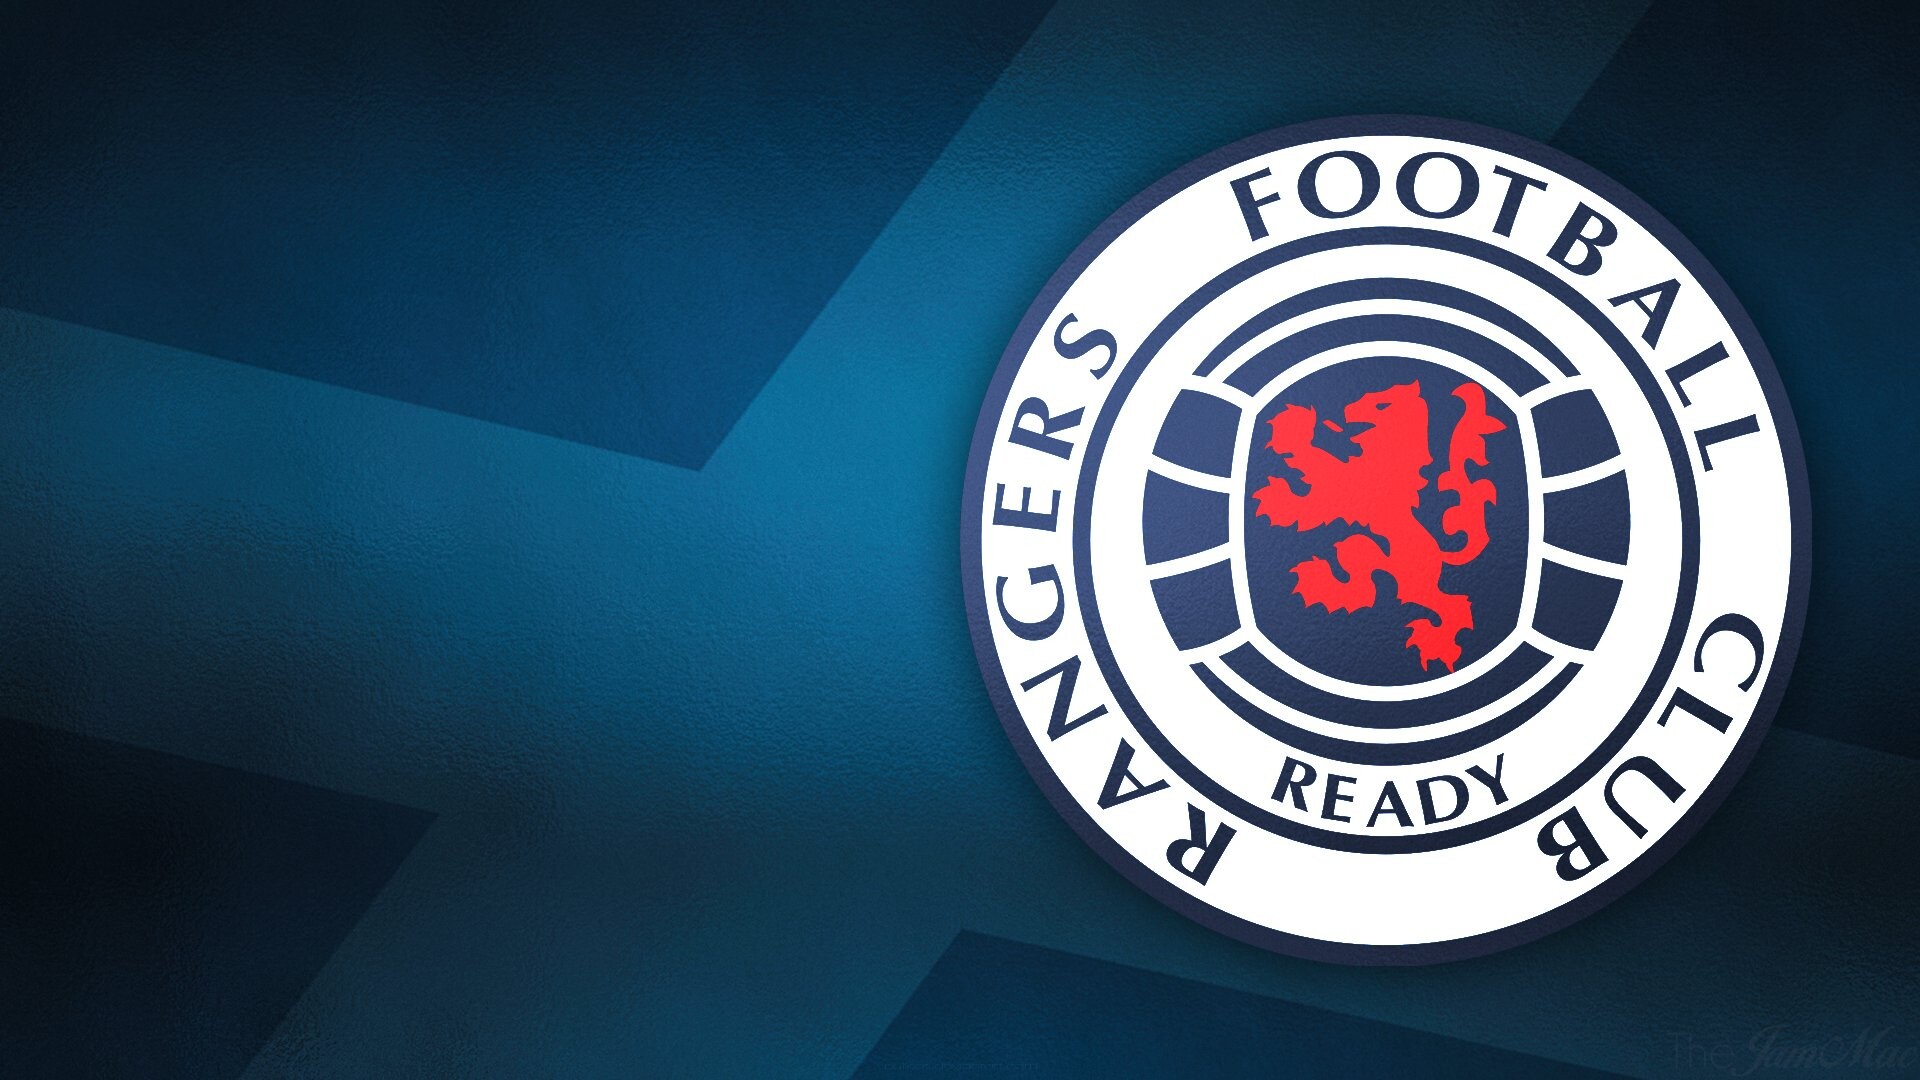 Rangers F.C.: Scottish professional football club from Glasgow, founded in 1872, Ready. 1920x1080 Full HD Wallpaper.